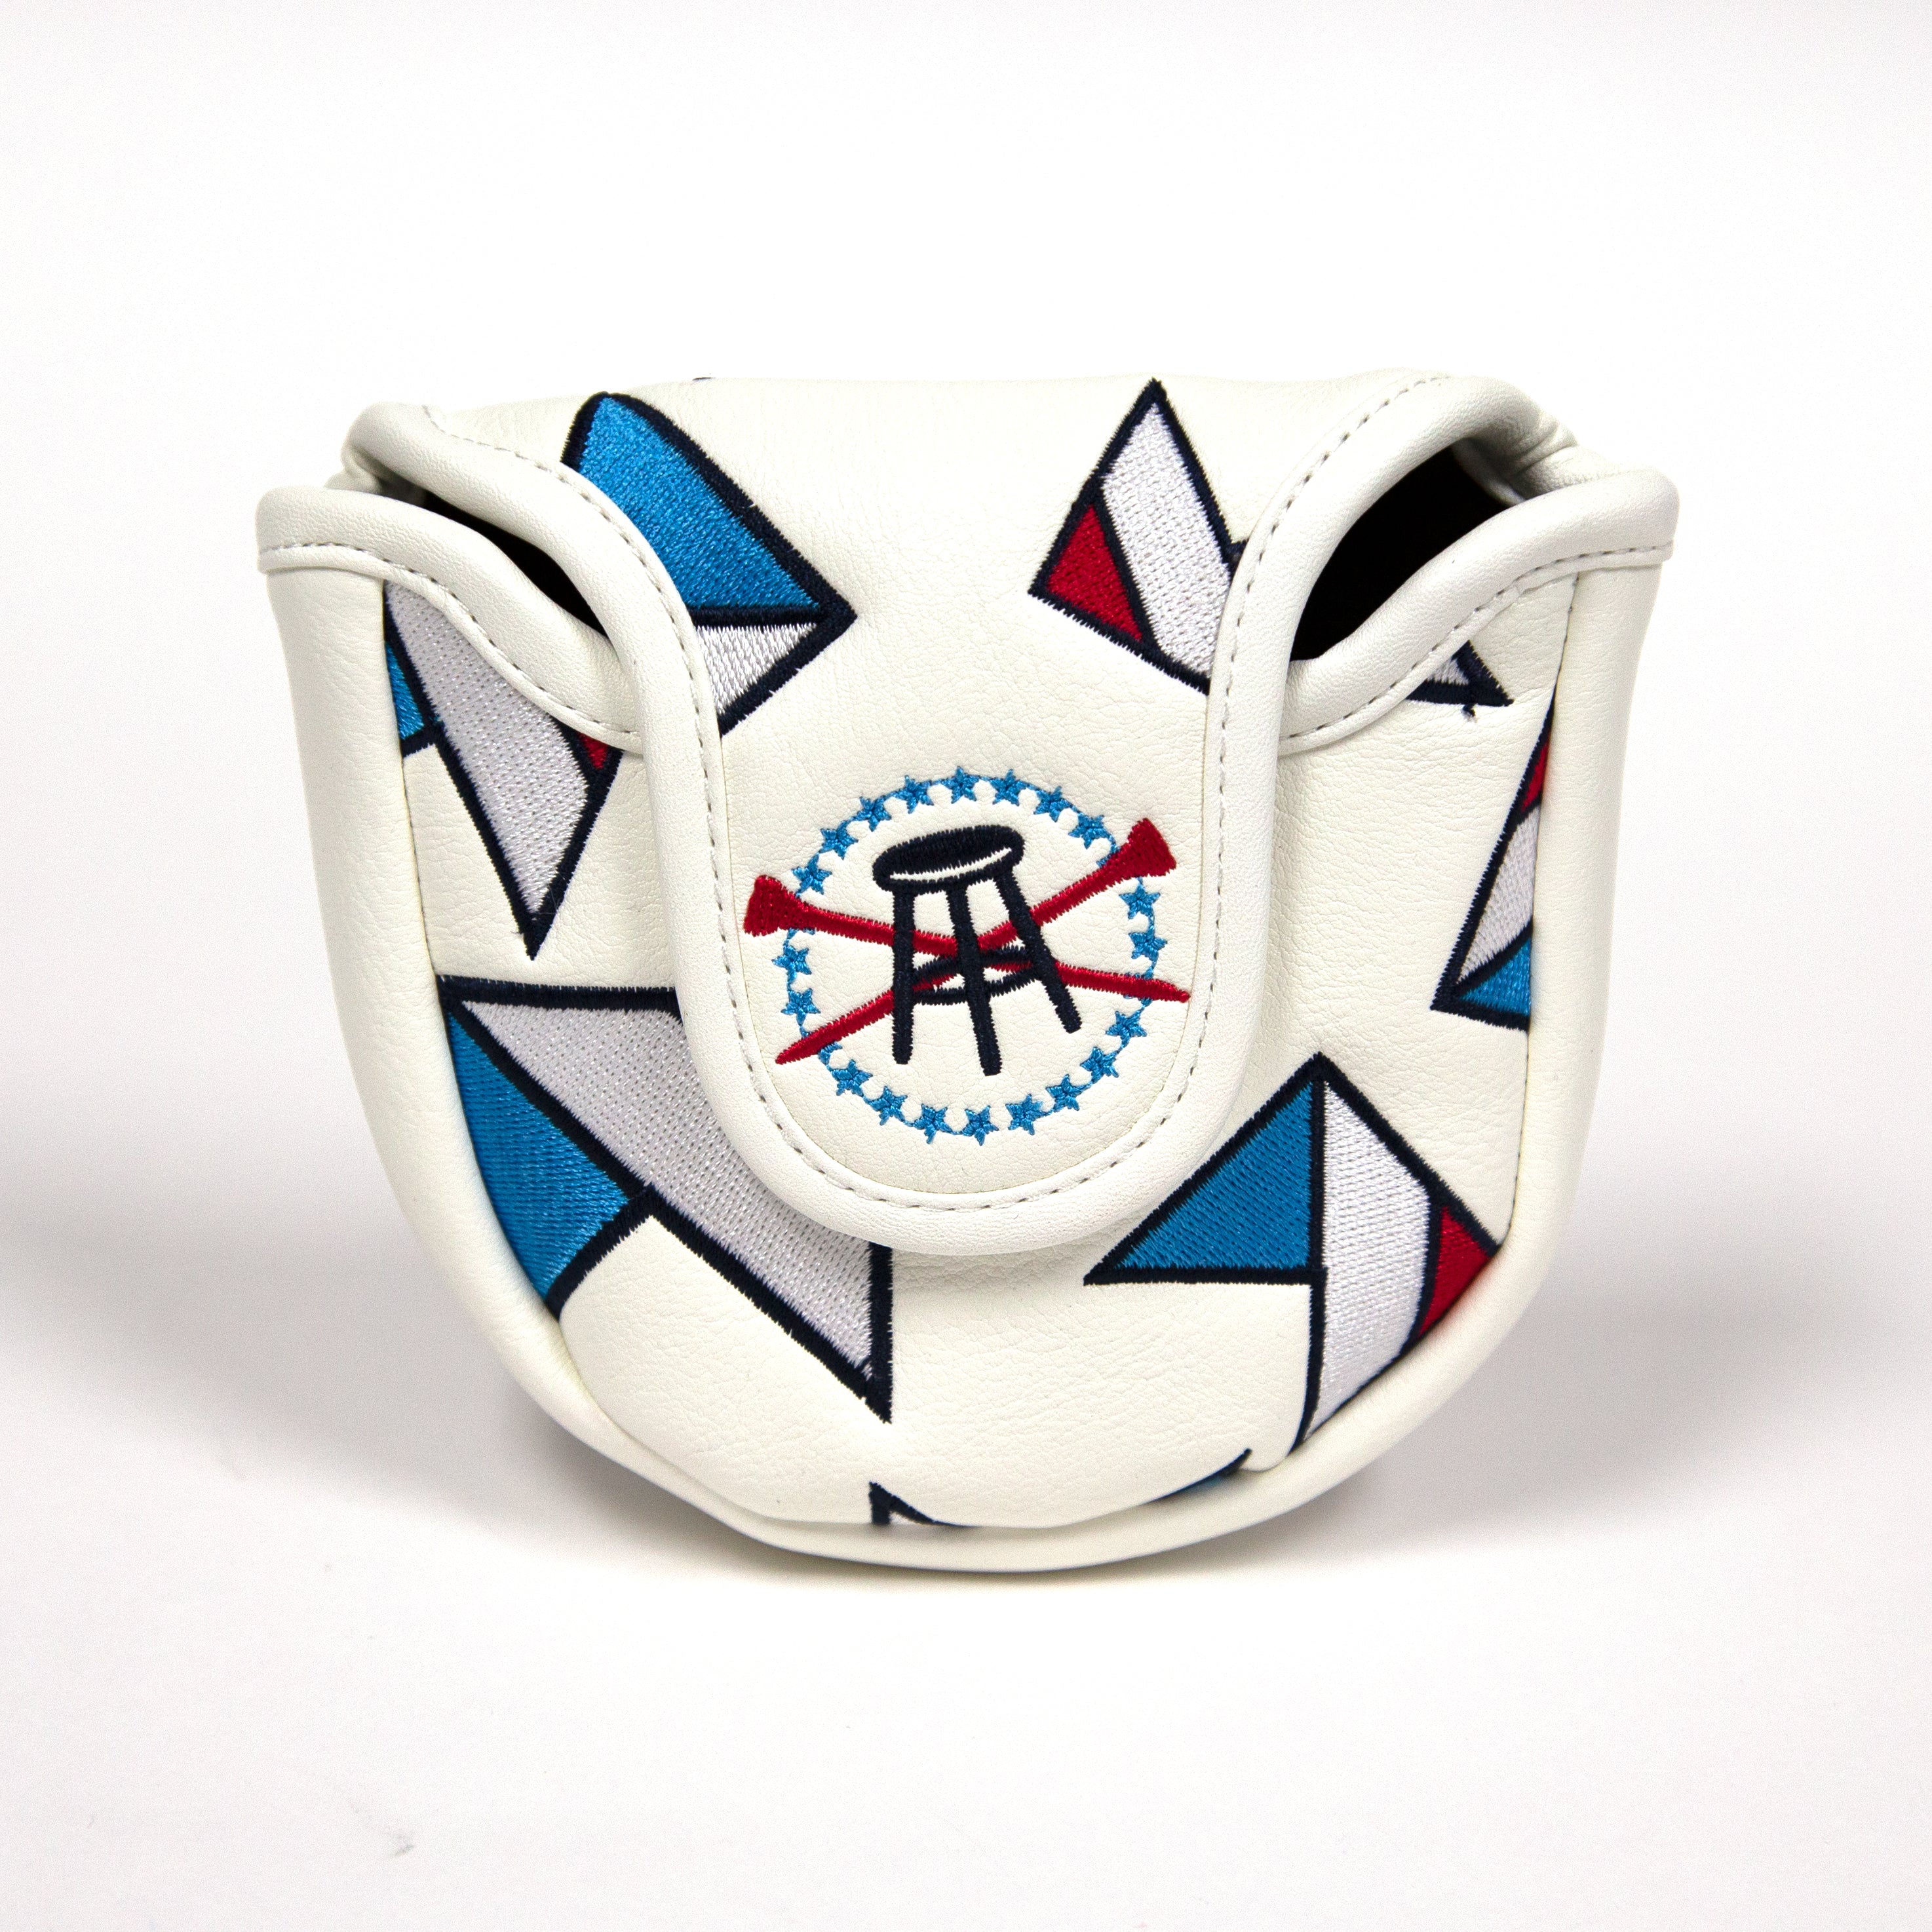 Barstool Golf Ain't No Hobby Mallet Putter Cover-Golf Accessories-Fore Play-White-One Size-Barstool Sports